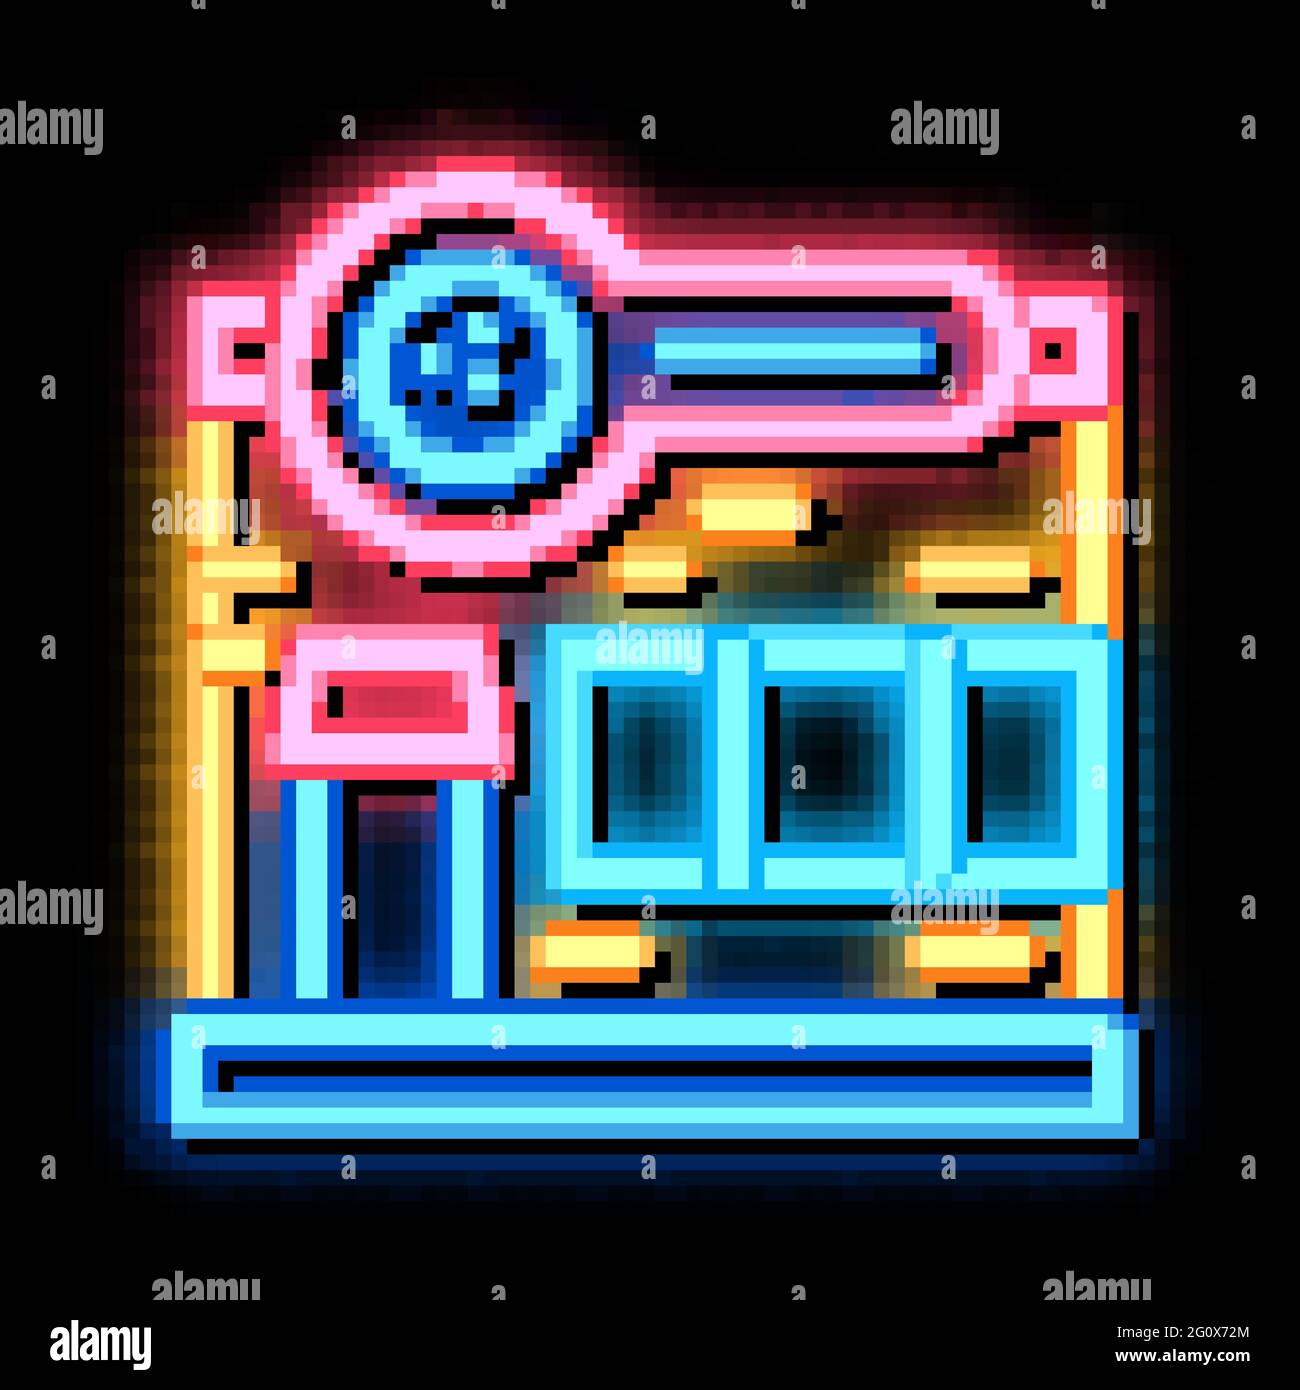 Bowling Building neon glow icon illustration Stock Vector